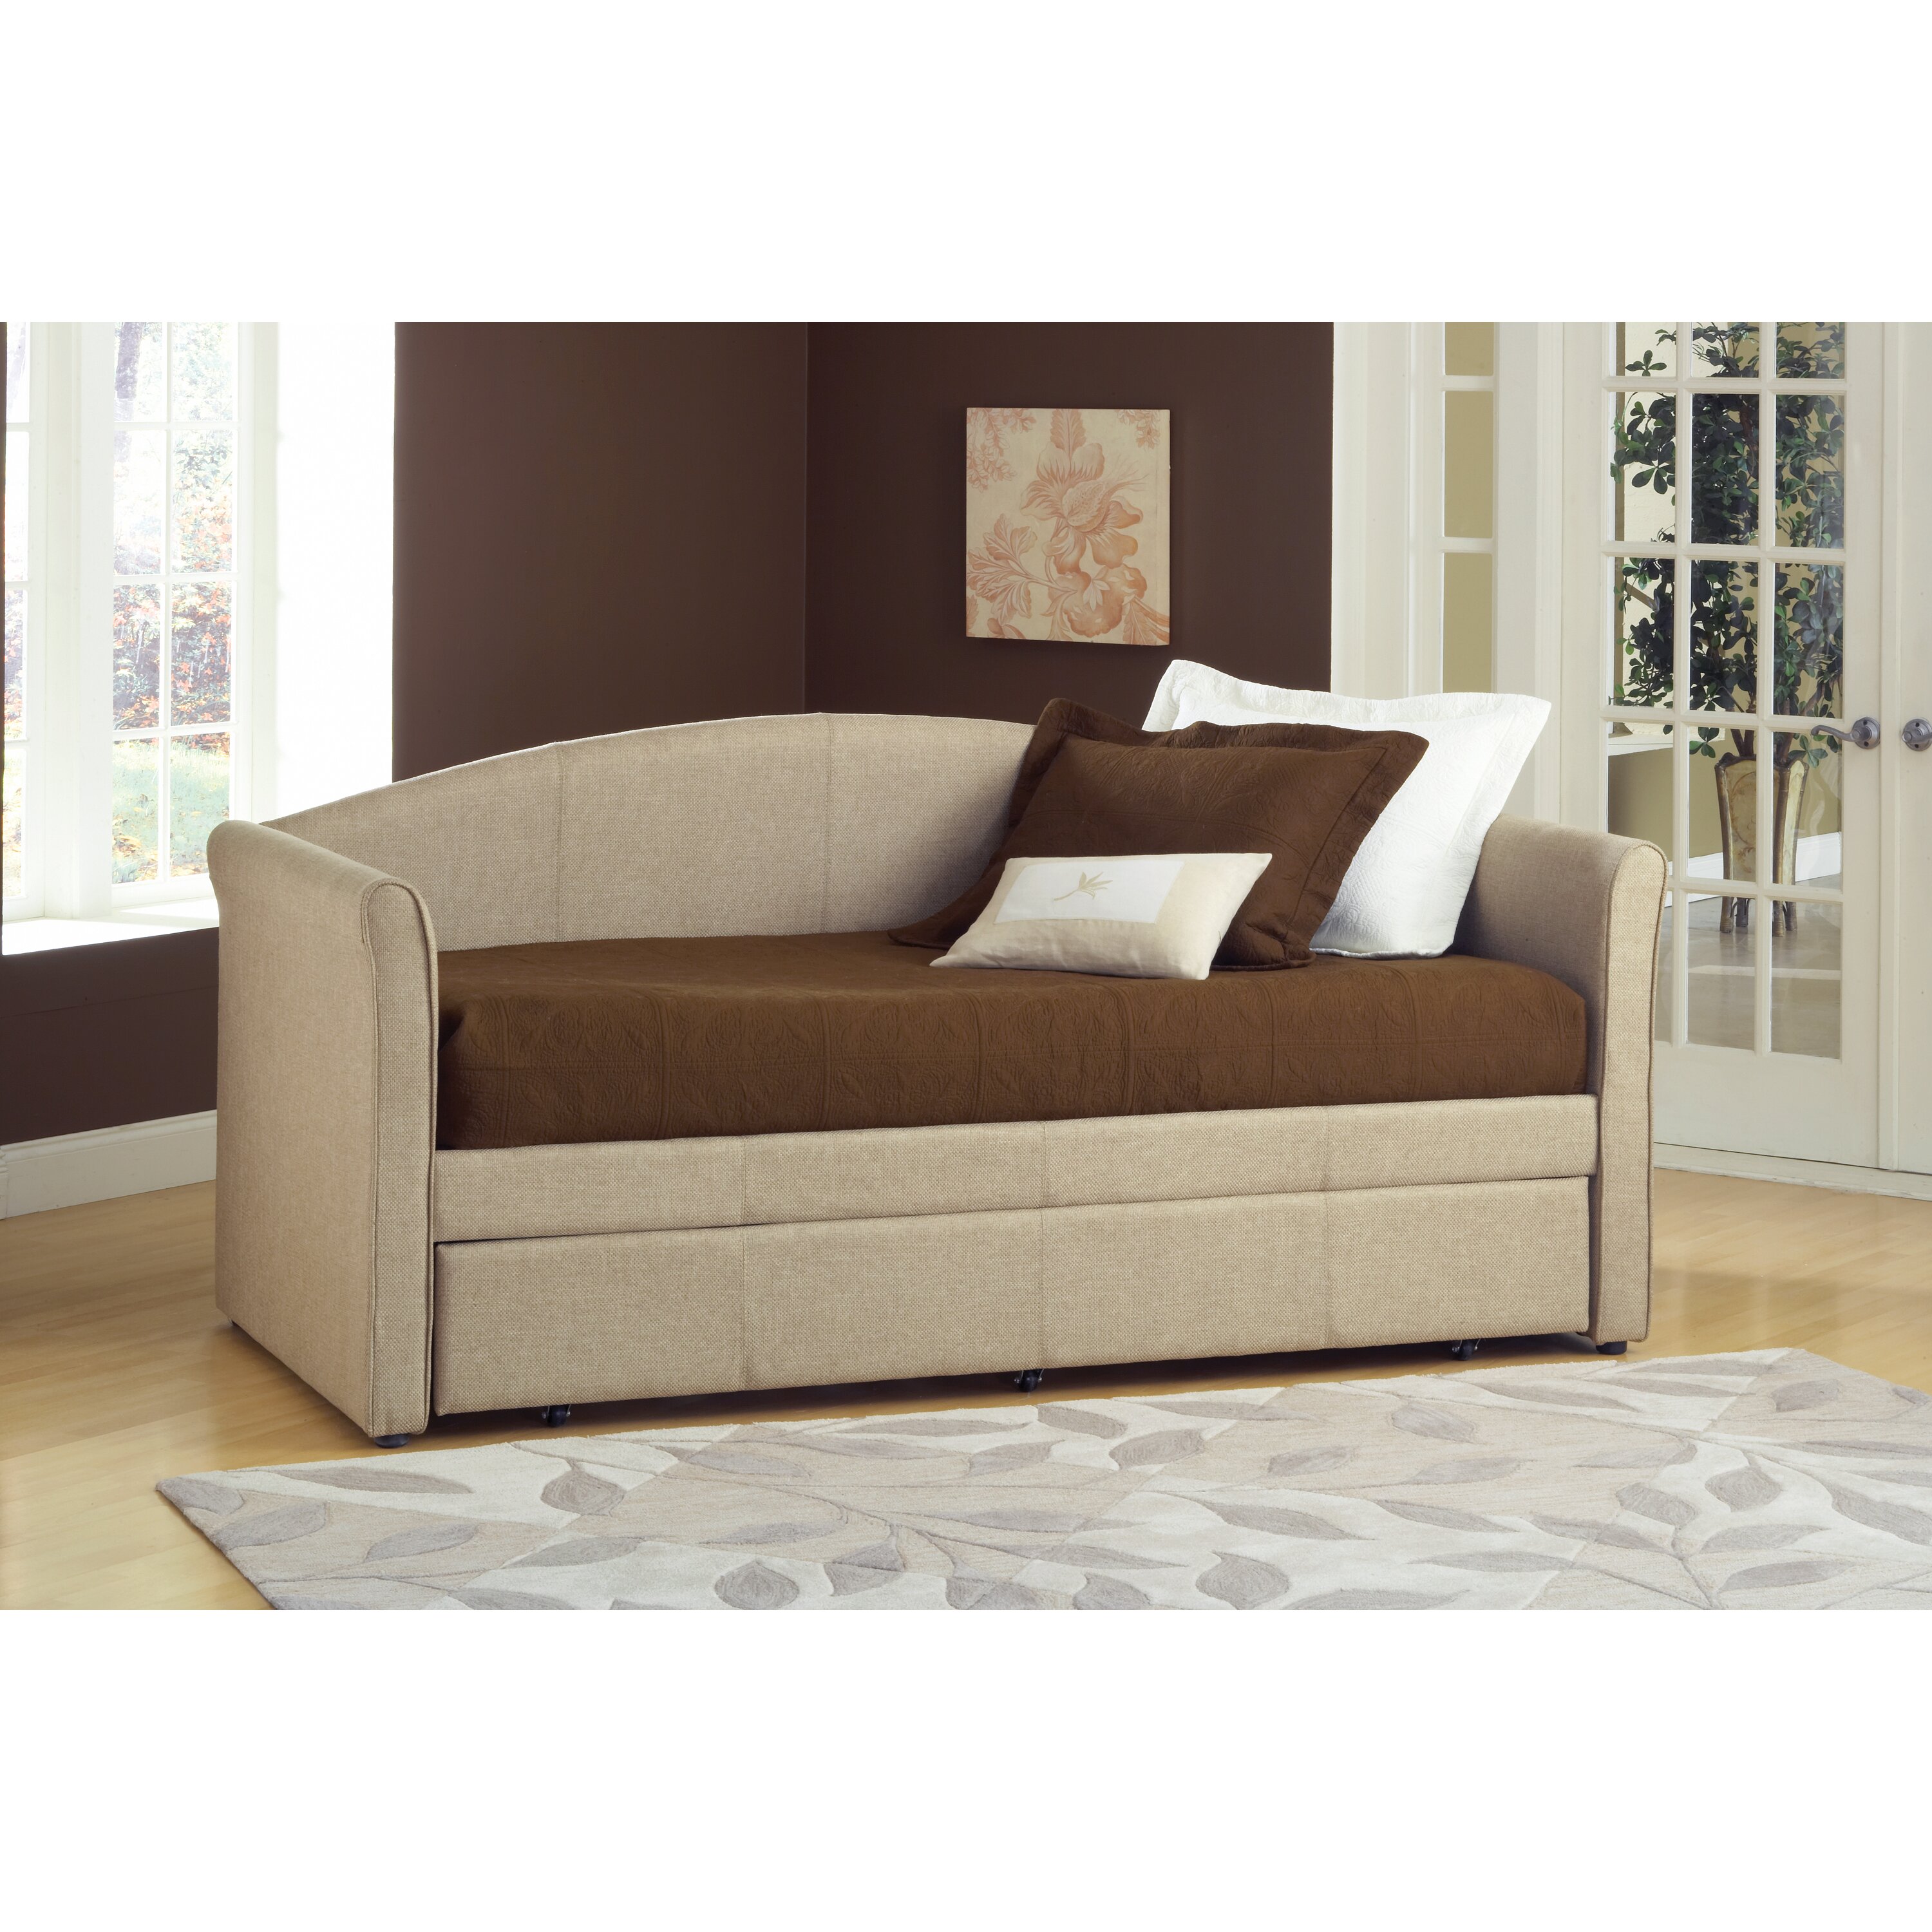 Hillsdale Siesta Daybed With Trundle And Reviews Wayfair 